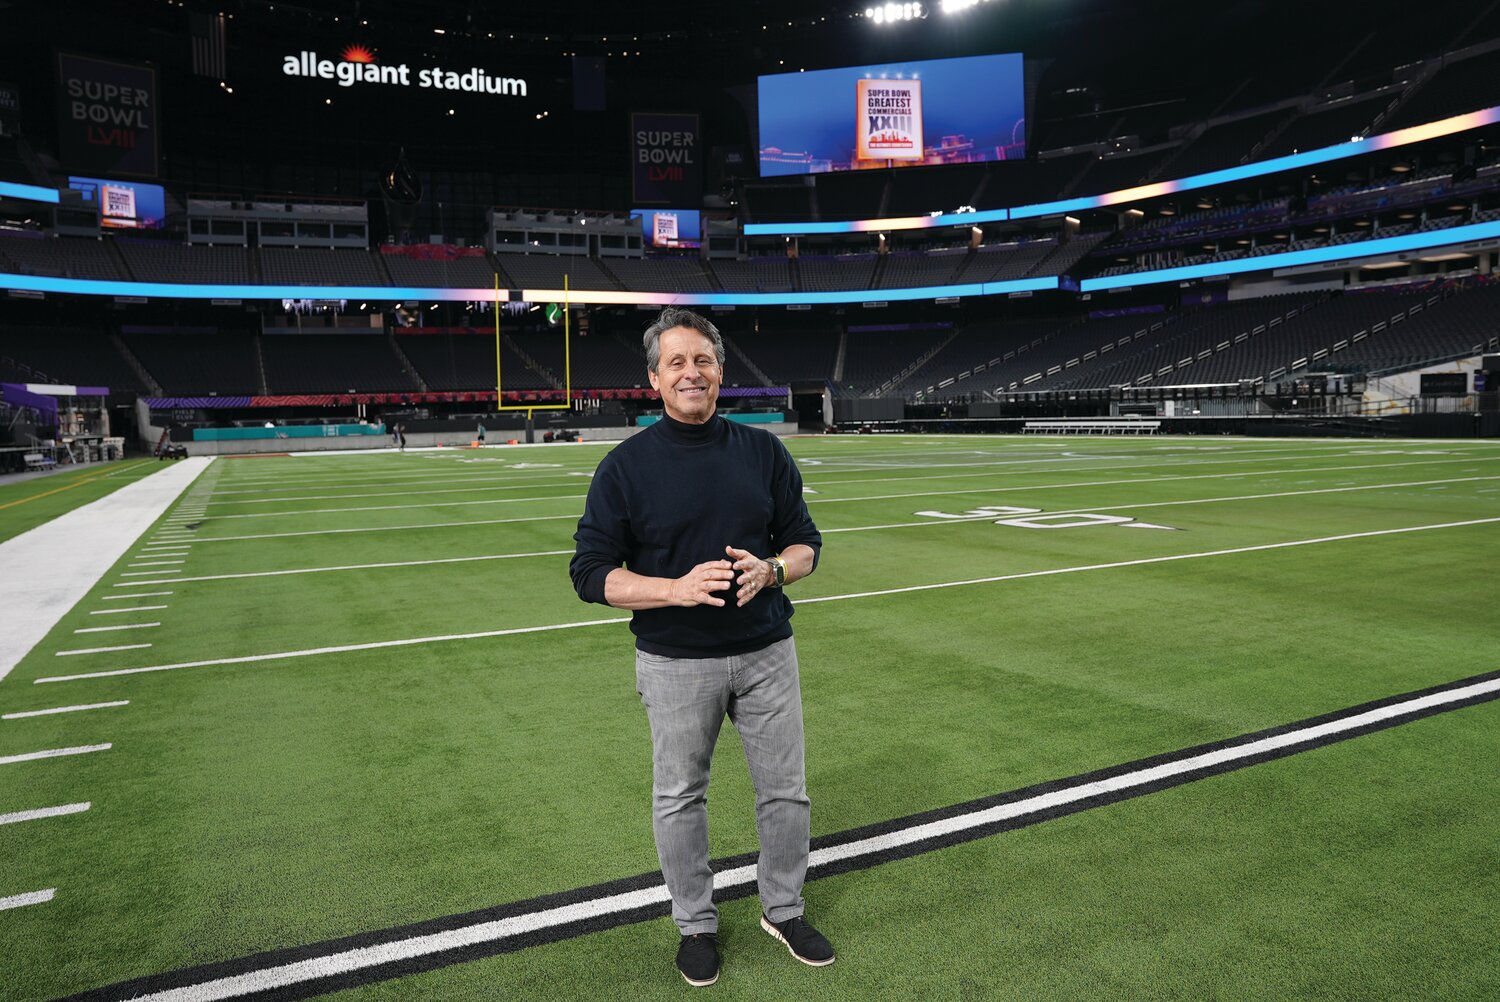 “Super Bowl Greatest Commercials XXIII: The Ultimate Countdown” show creator and executive producer Robert Horowitz of Newtown-based JUMA Entertainment on location at Allegiant Stadium in Las Vegas.